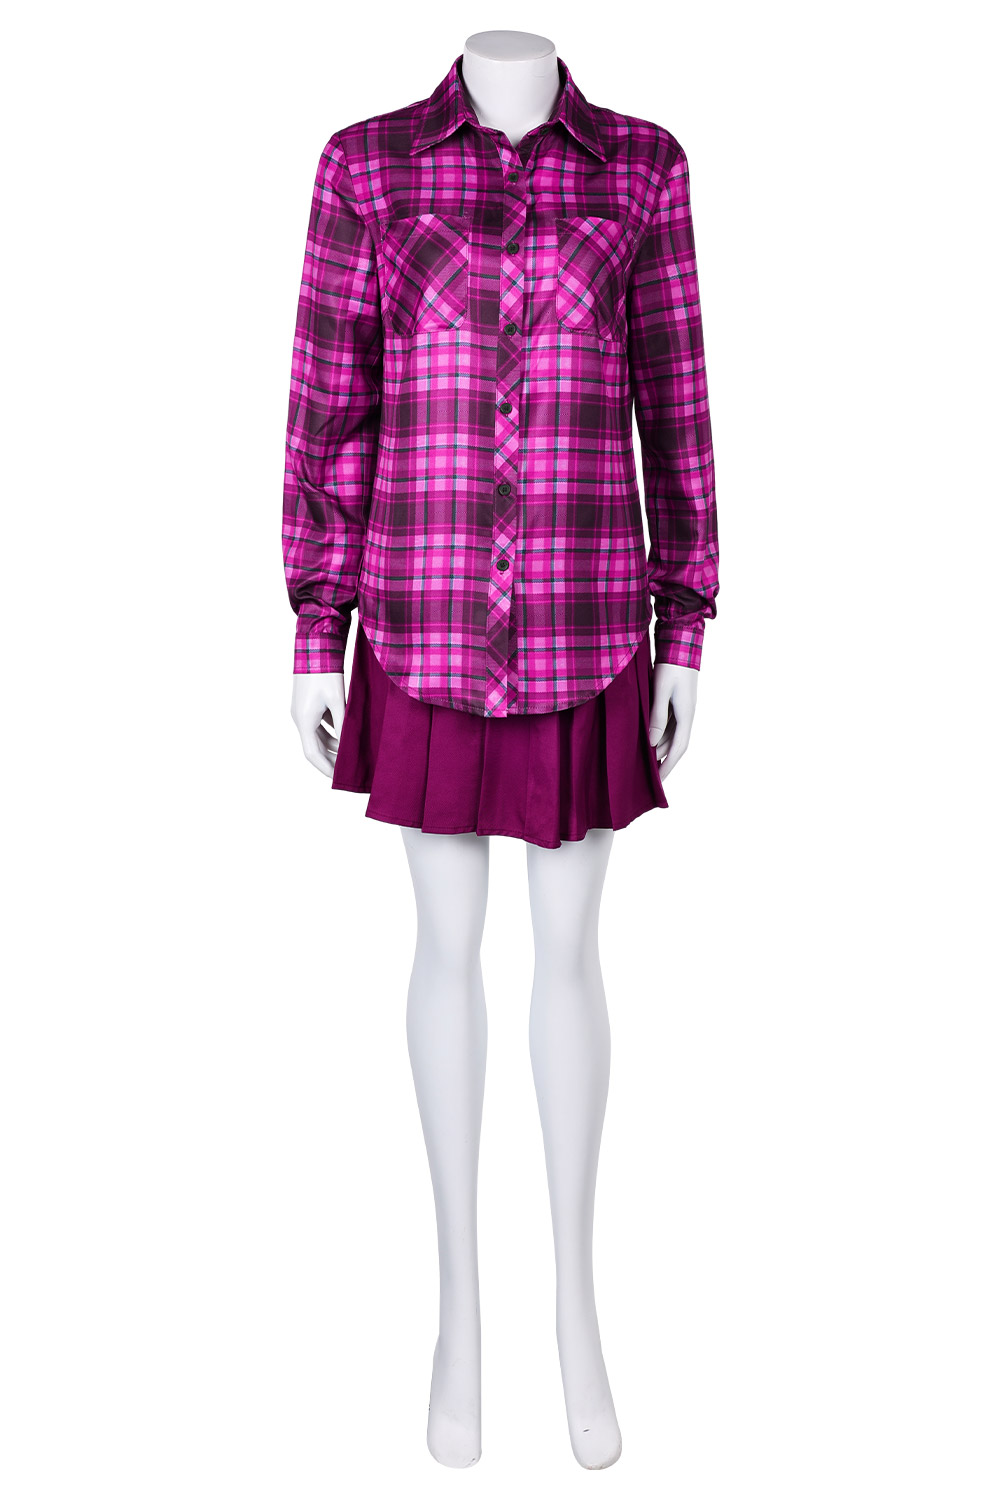 Movie Mean Girls 2024 Cady Heron Purple Plaid Outfits Halloween Carnival Suit Cosplay Costume